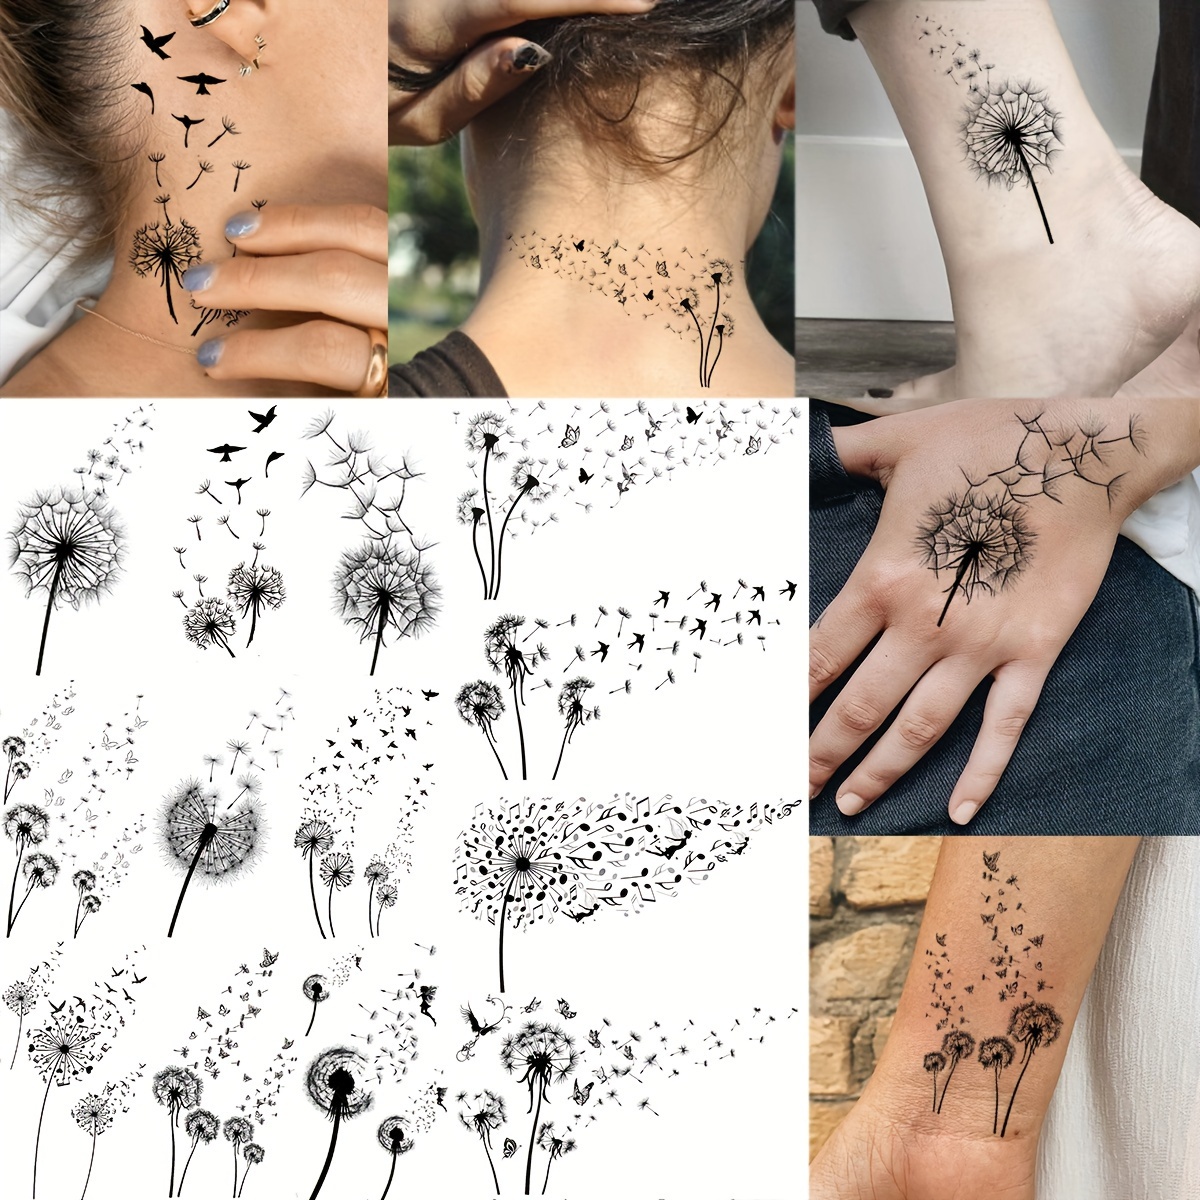 

intricate Floral" 13-piece Realistic Black Dandelion Temporary Tattoos For Women & Girls - Waterproof, Long-lasting Body Art Stickers For Arms, Neck, Legs & More